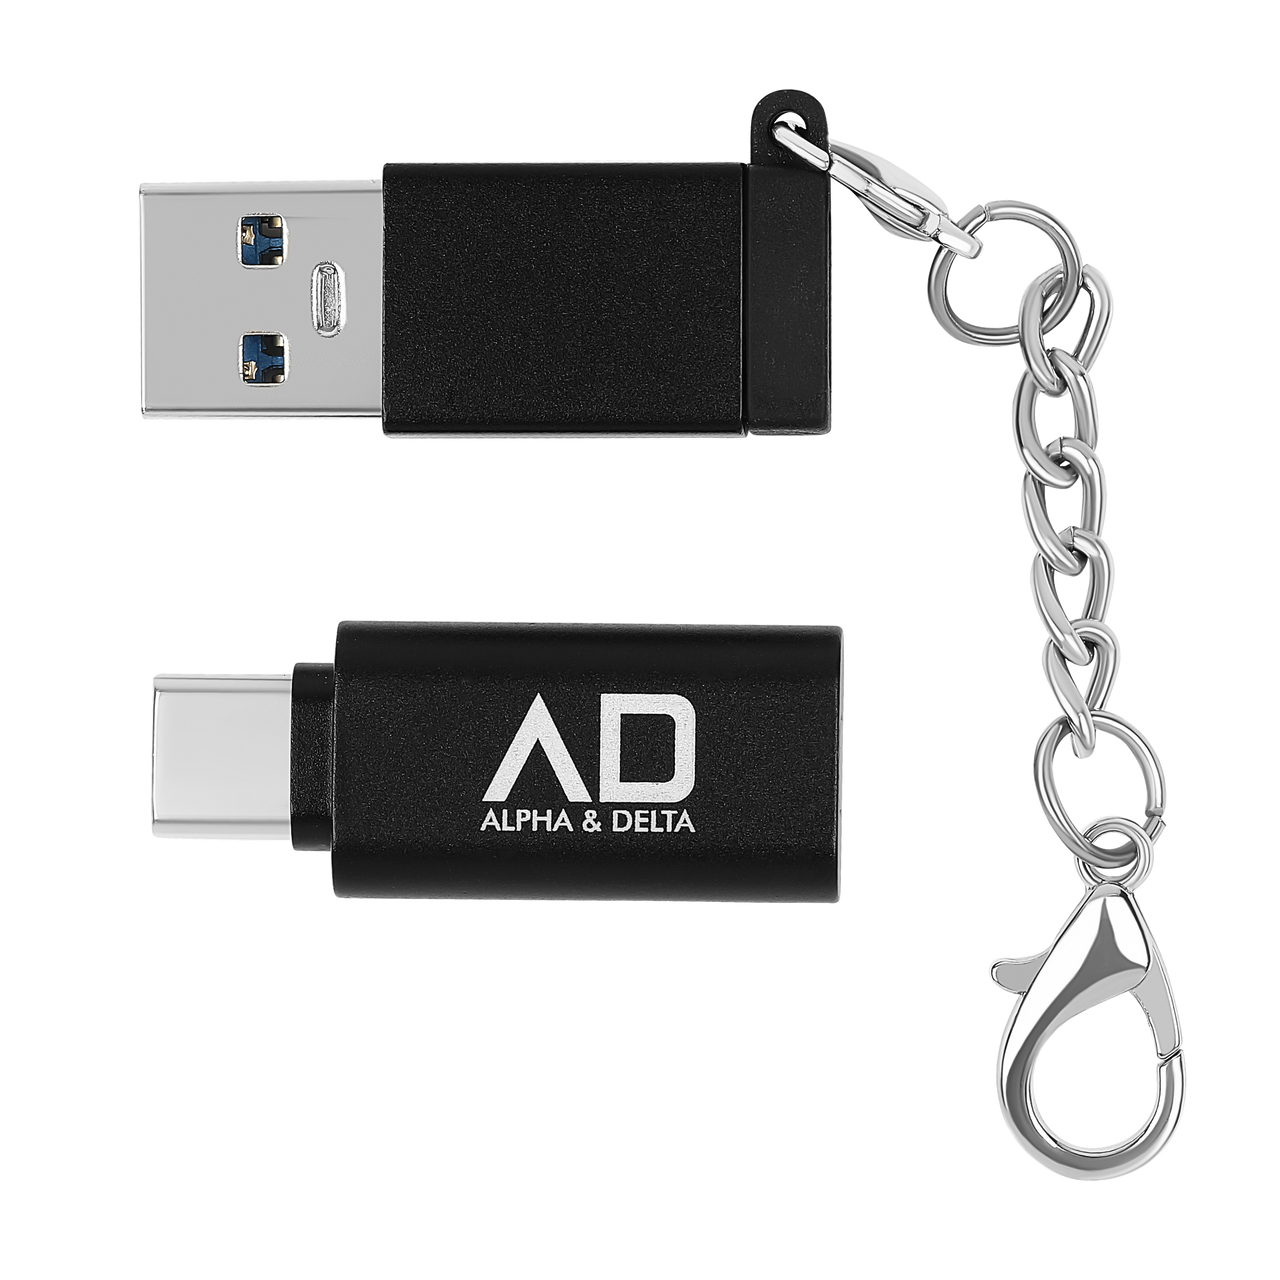 Dongles/Dac/Amps